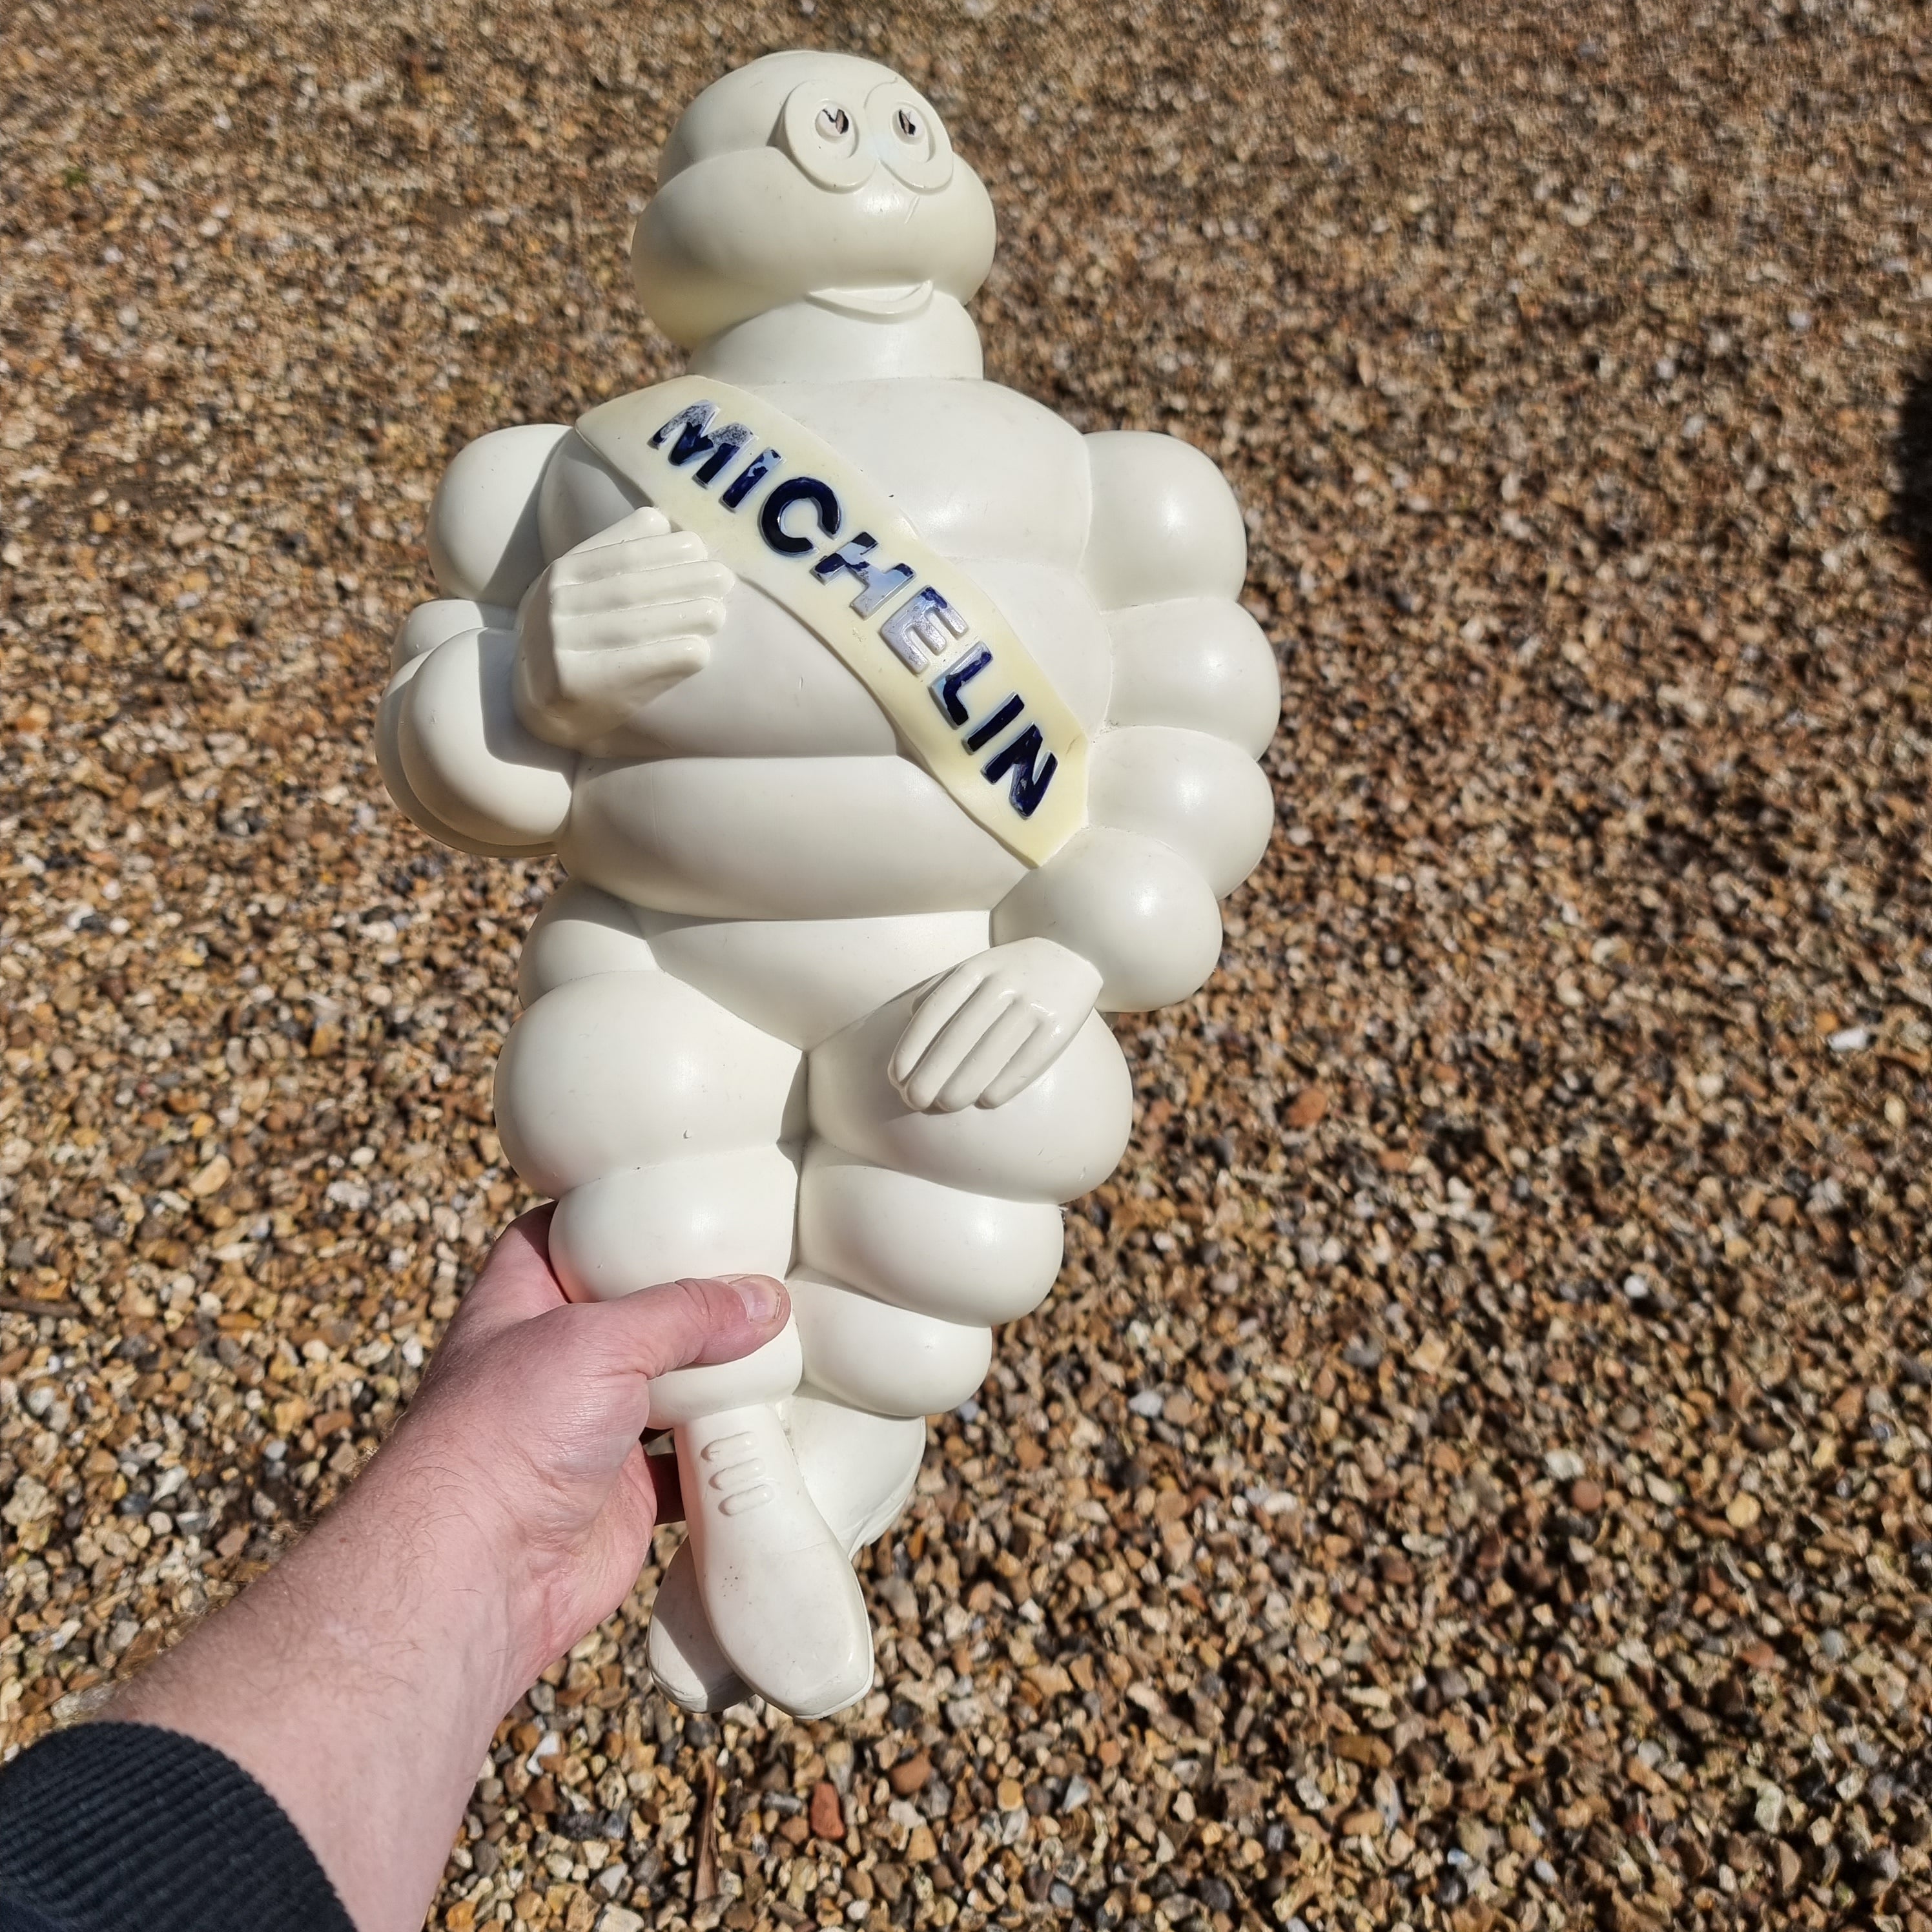 Michelin man Bibendum (size about 38 cm) for old truck troubleshooter